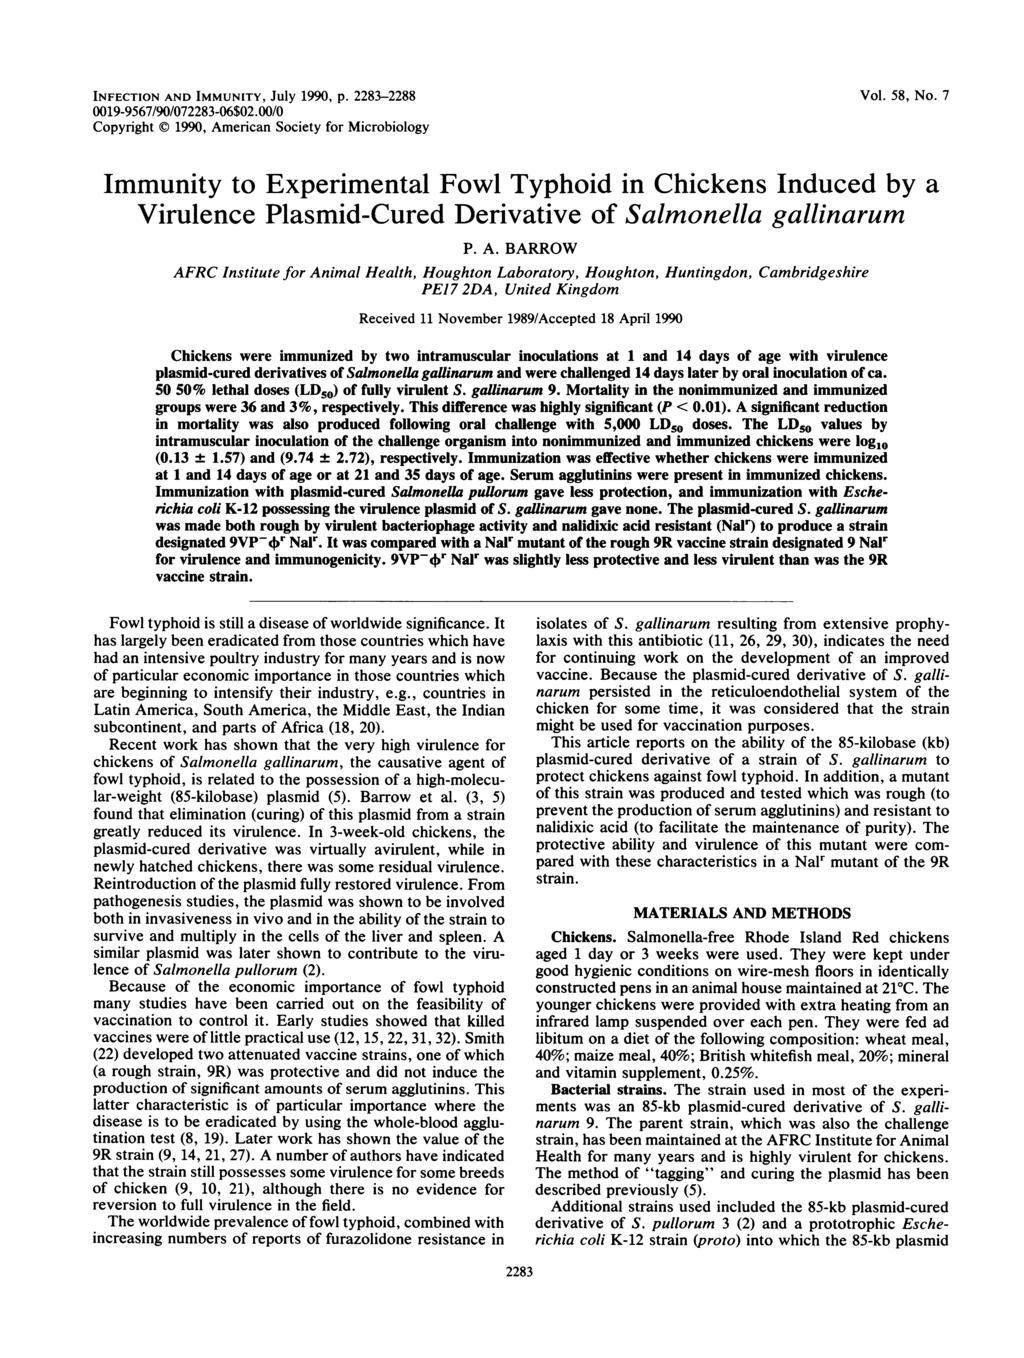 INFECTION AND IMMUNITY, JUlY 1990, p. 2283-2288 0019-9567/90/072283-06$02.00/0 Copyright C) 1990, Americn Society for Microbiology Vol. 58, No.